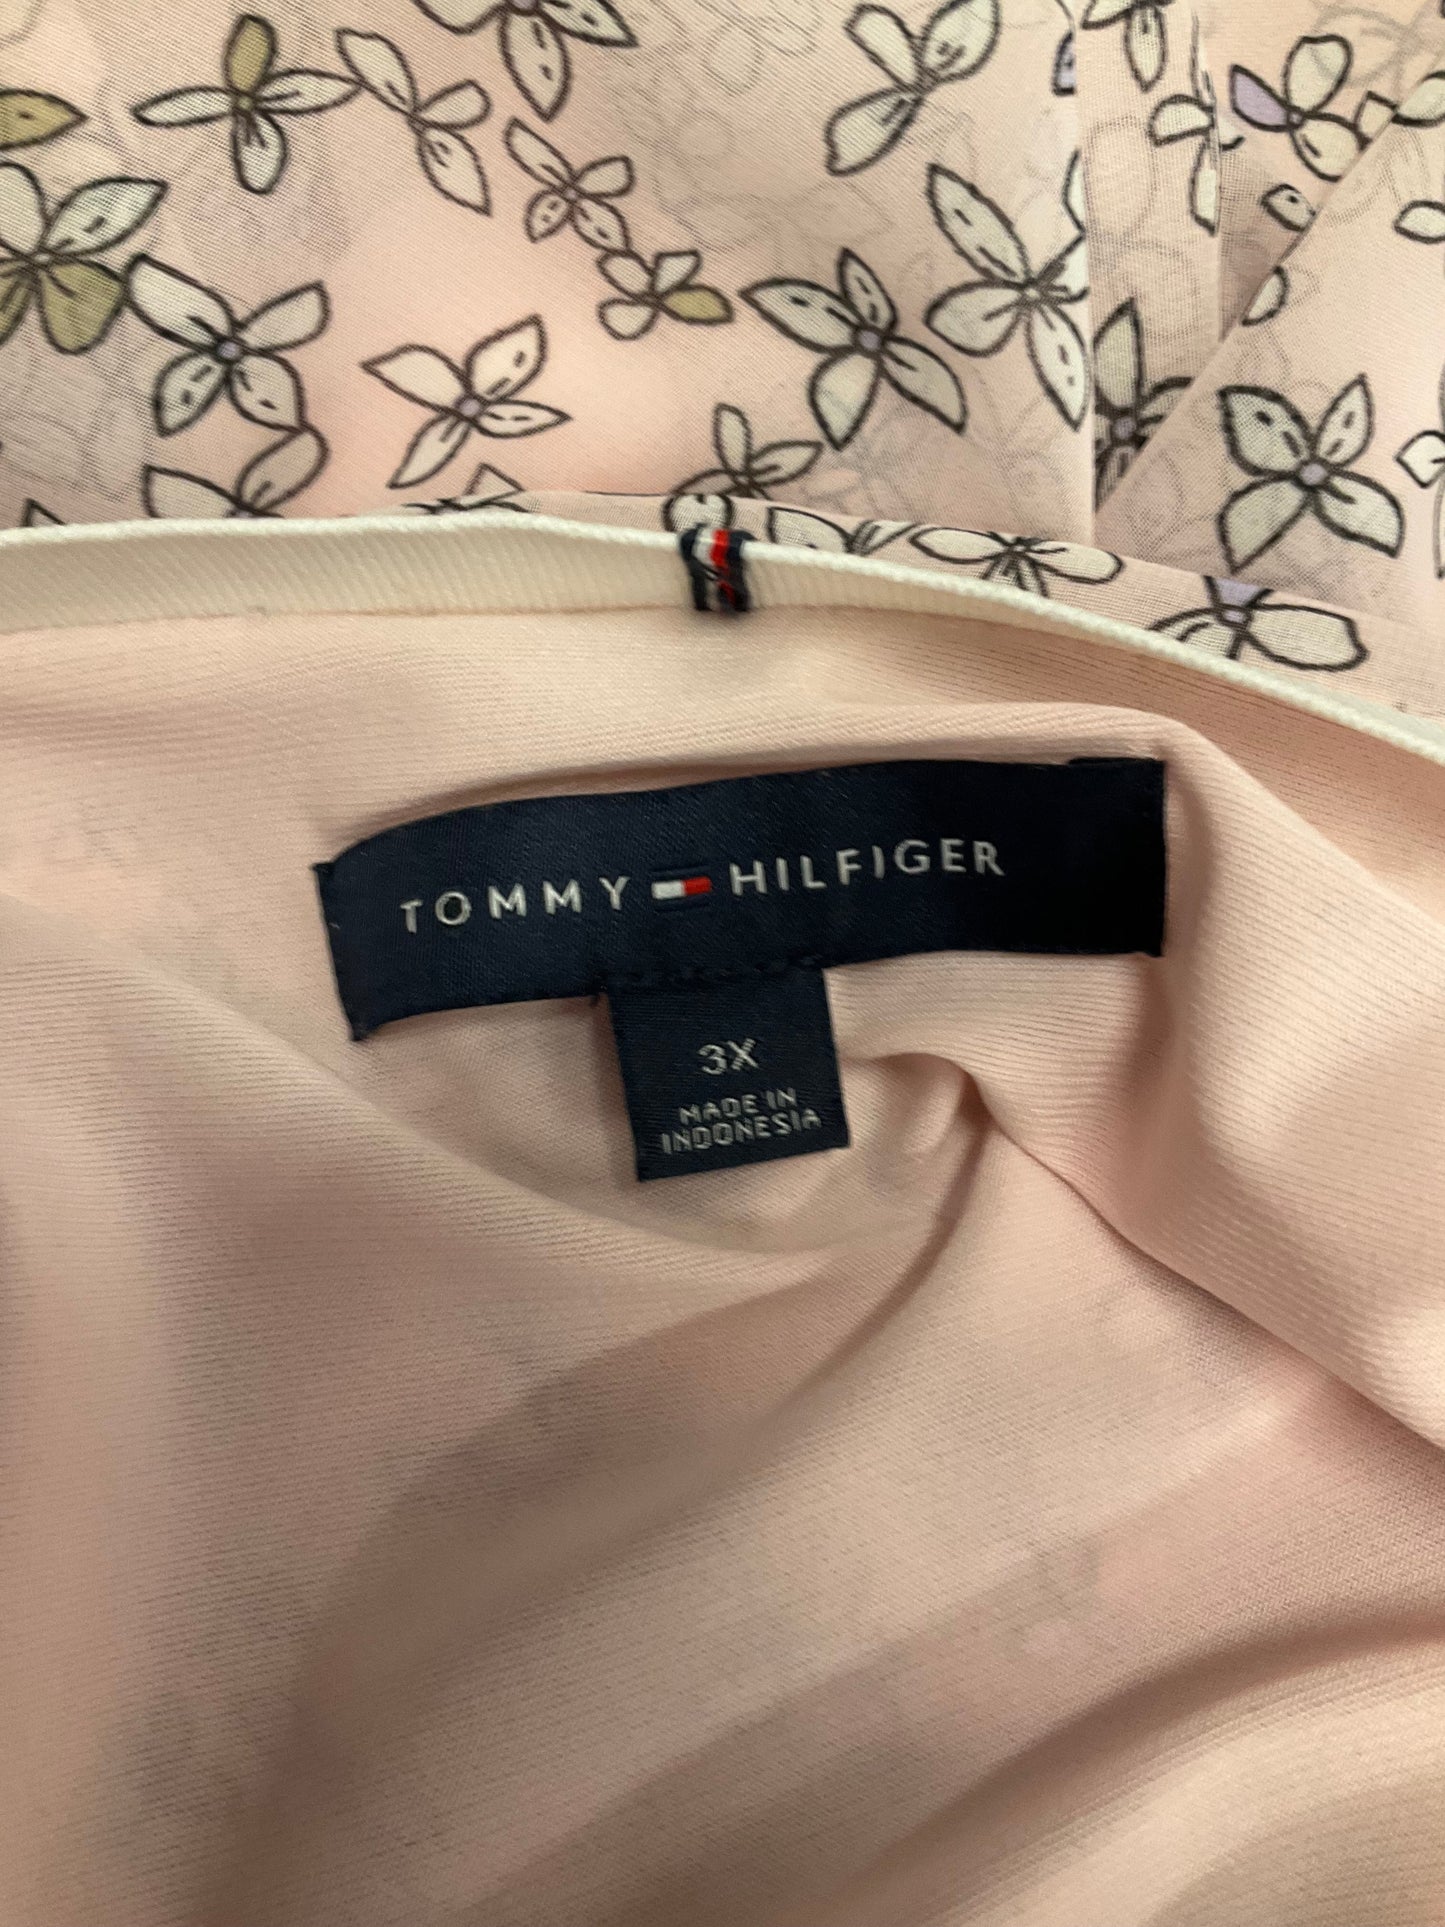 Floral Print Top 3/4 Sleeve Tommy Hilfiger, Size 3x